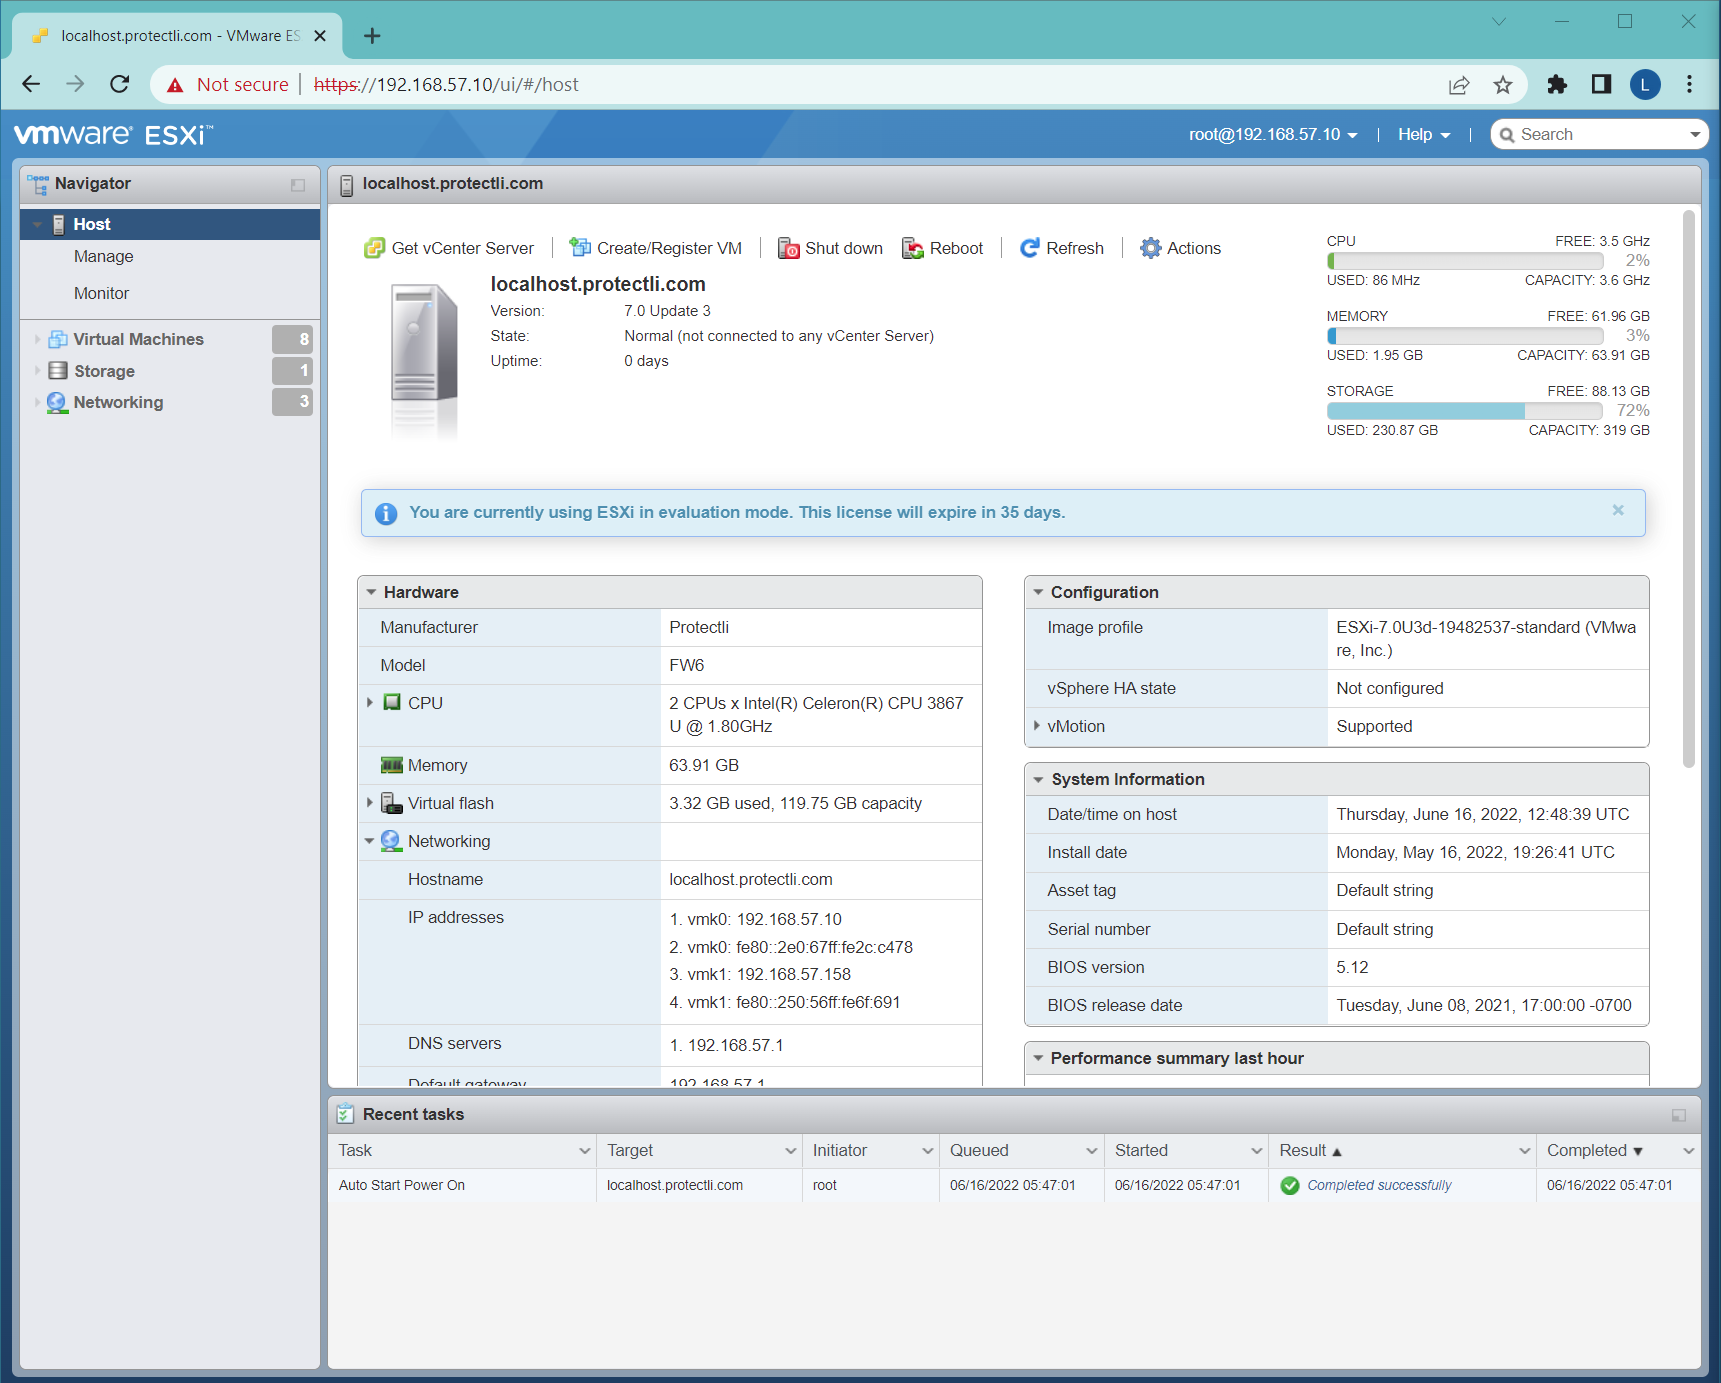 How to install OPNsense in ESXi 7 on the Vault